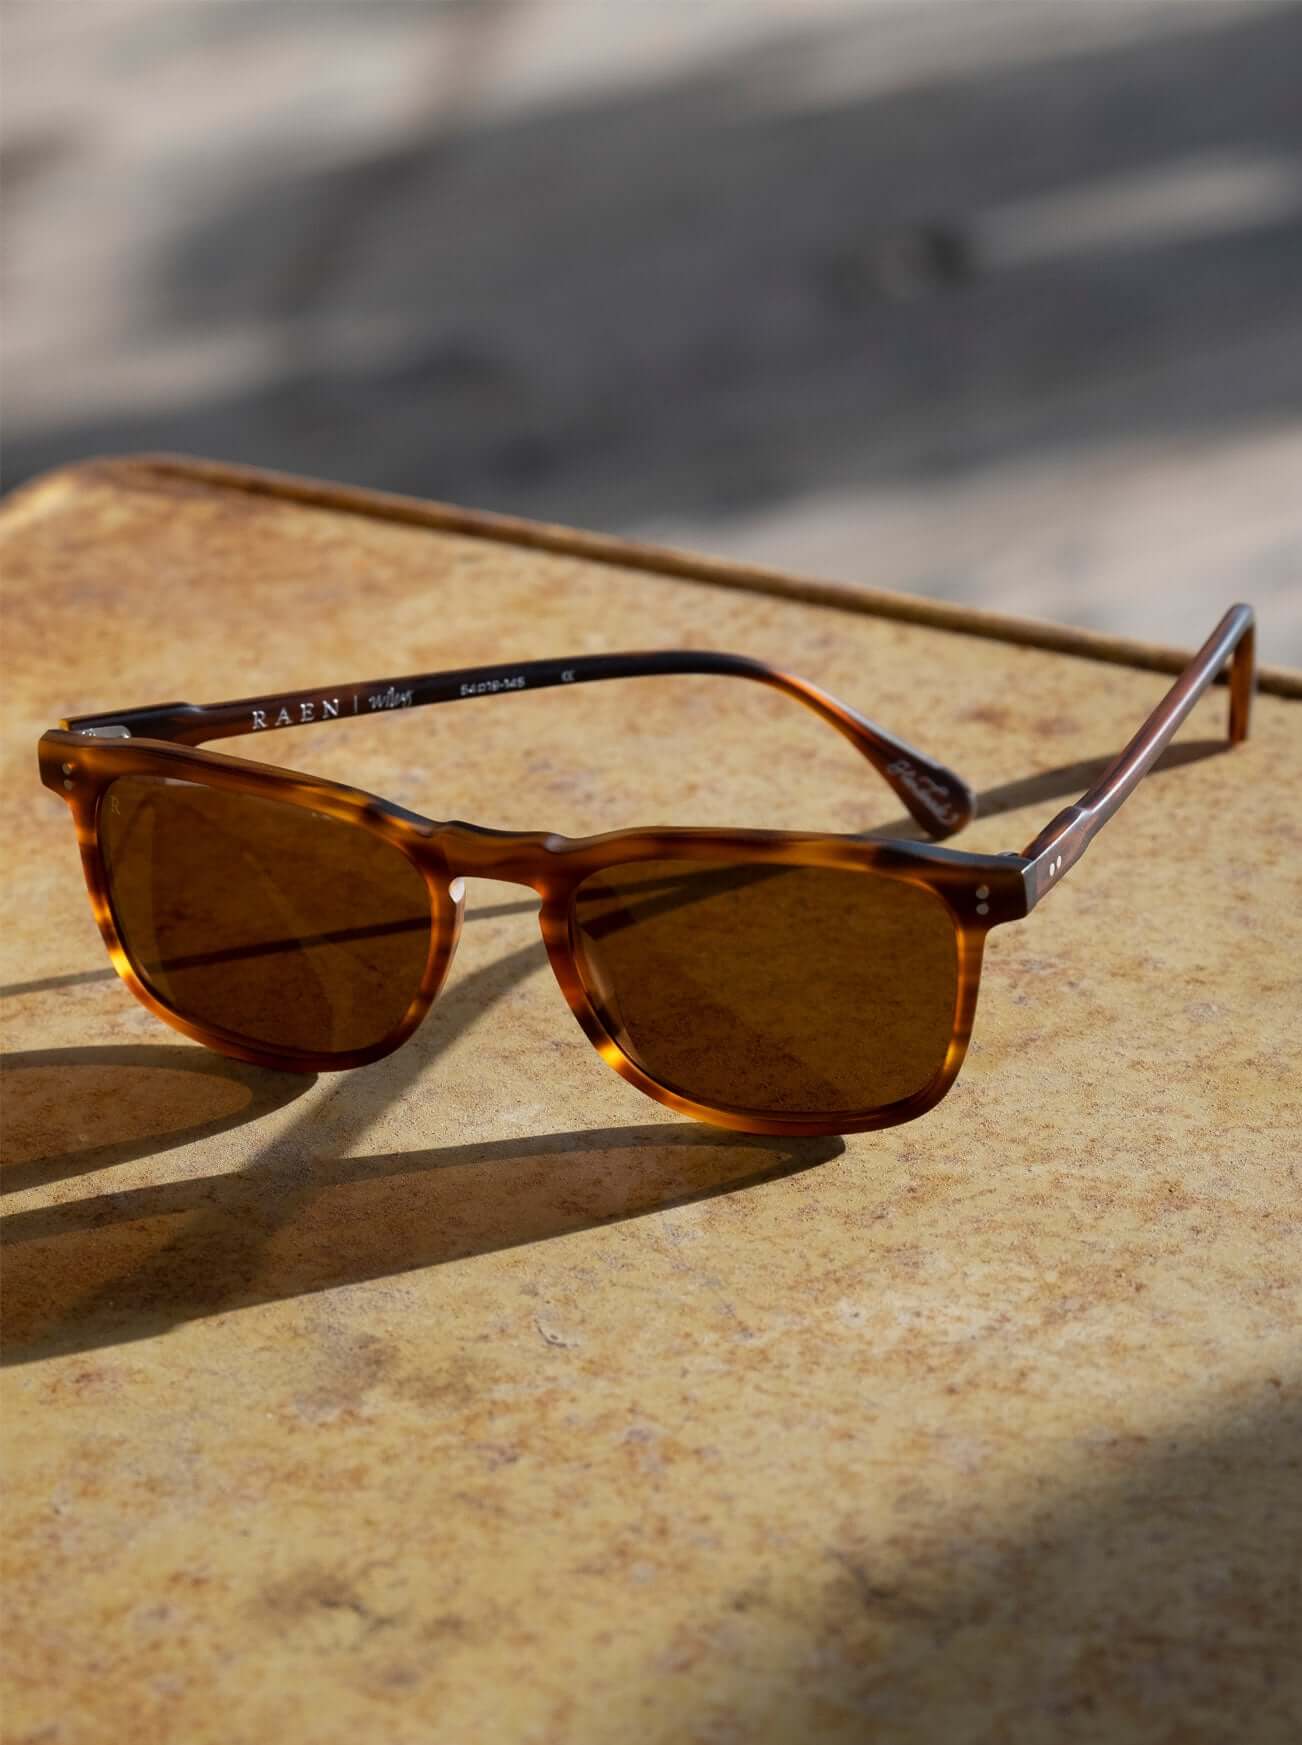 A pair of RAEN's Wiley Men's Square Sunglasses with Matte Rootbeer frames and Brown lenses